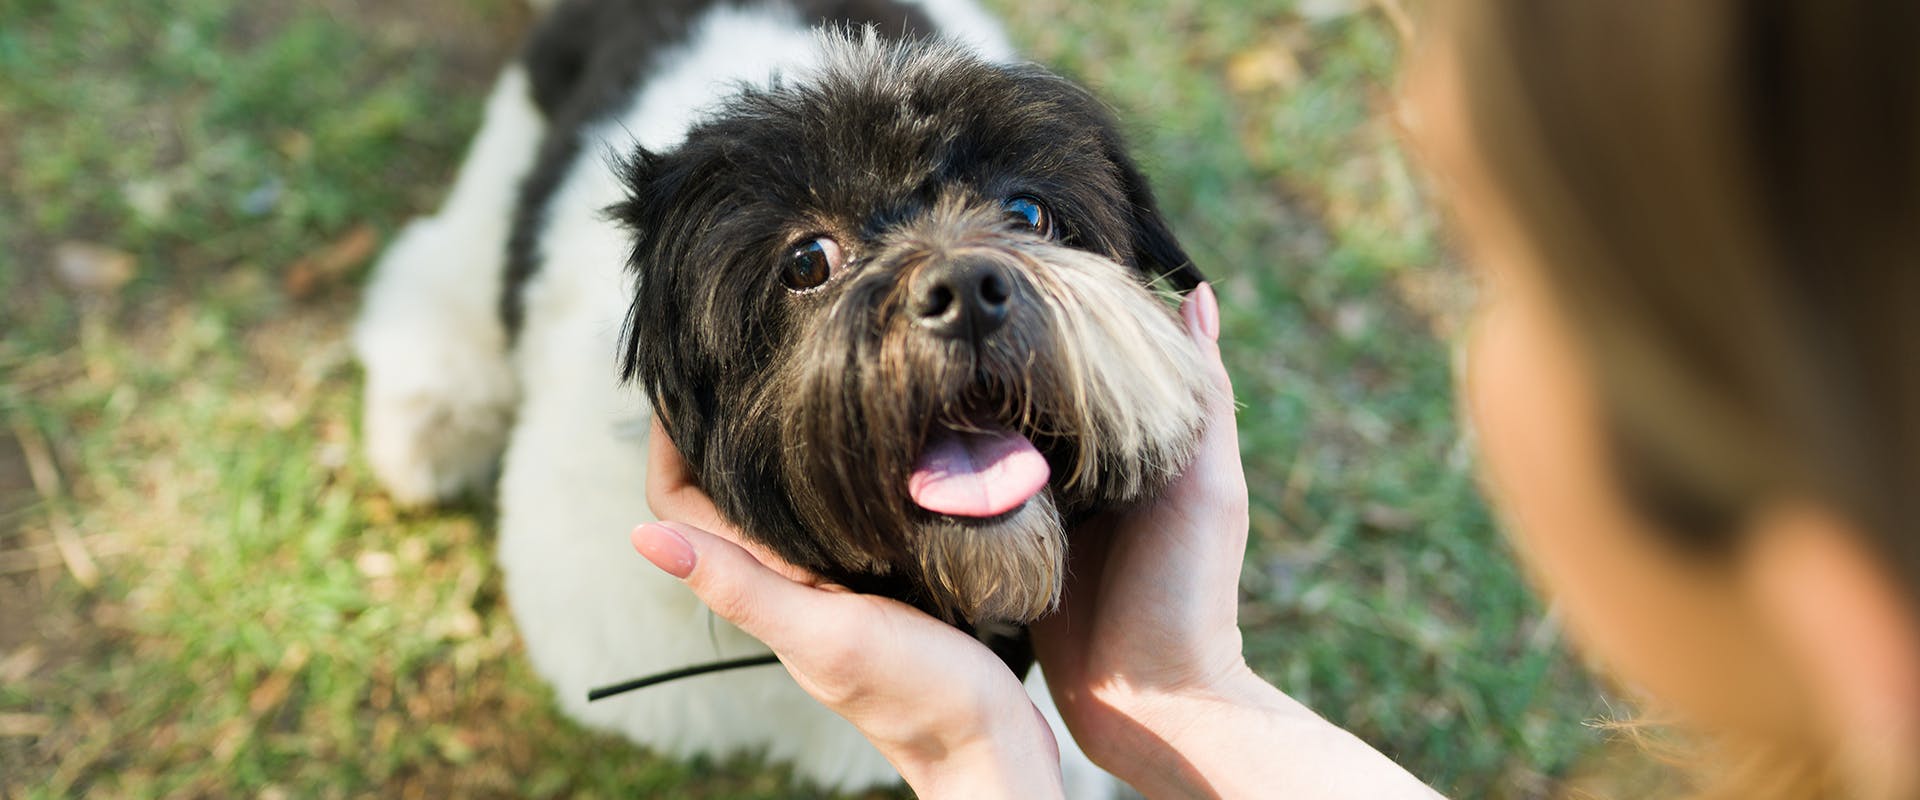 A person affectionately holding a Shih Tzu's head